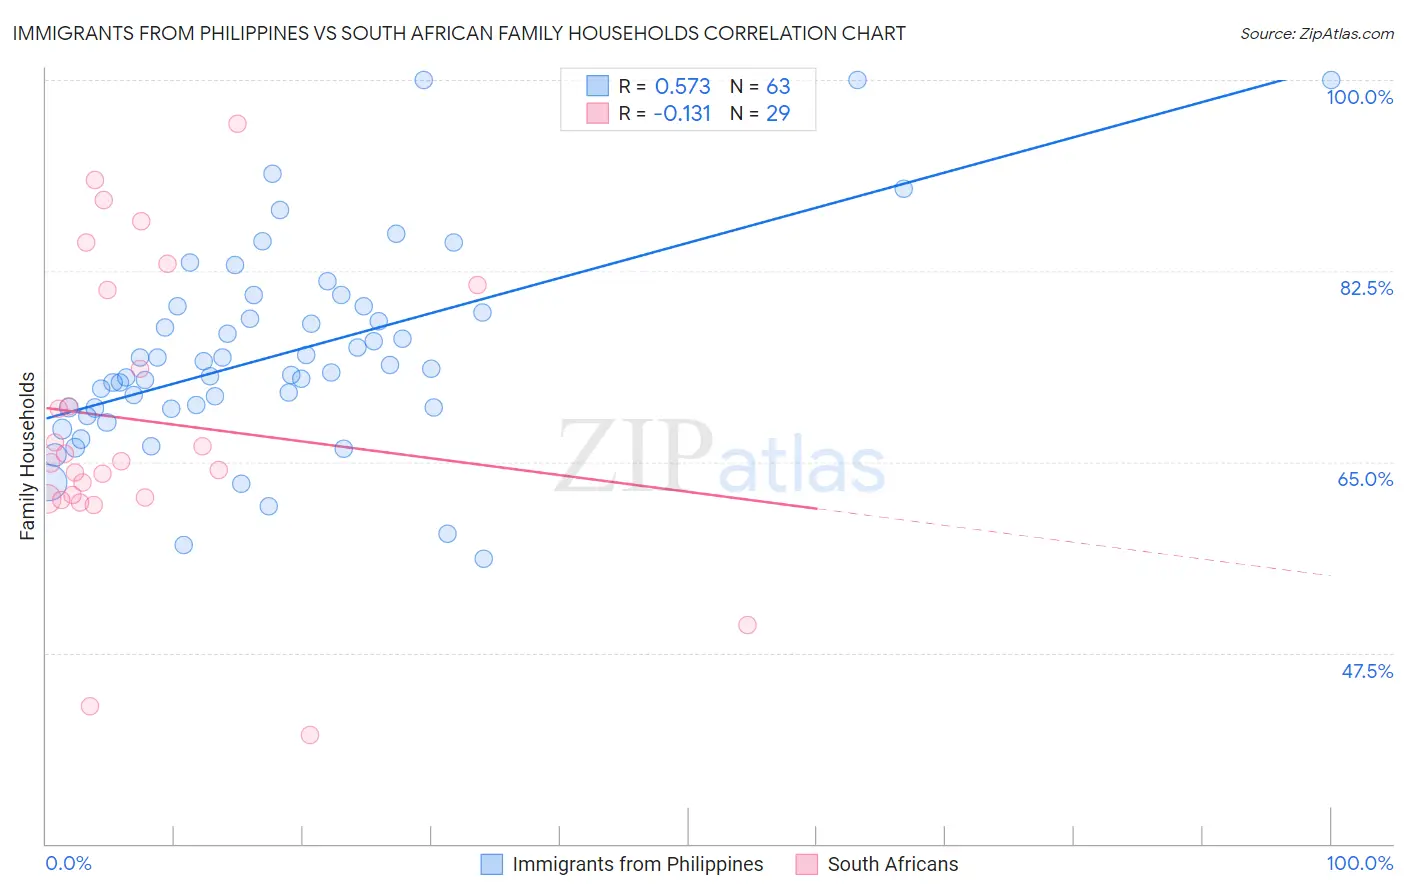 Immigrants from Philippines vs South African Family Households